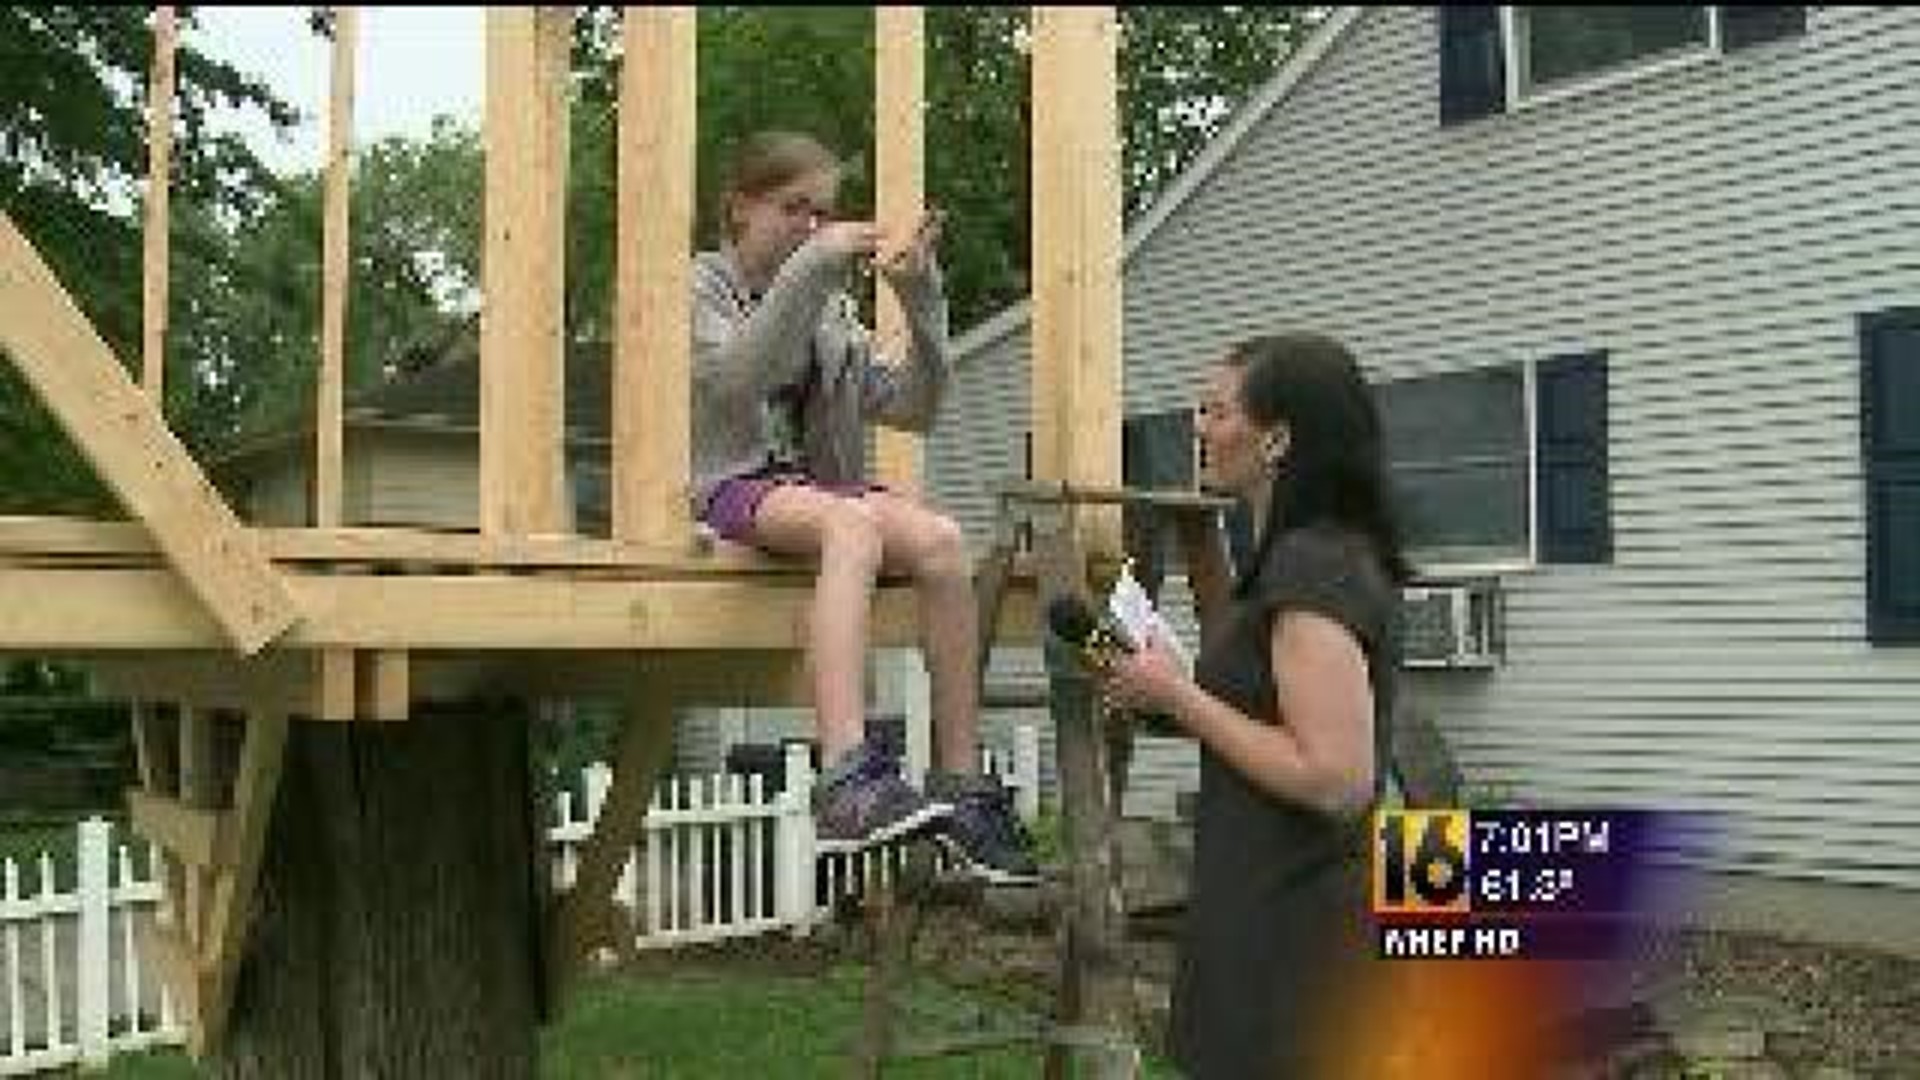 Father Ordered to Remove Tree House in Selinsgrove